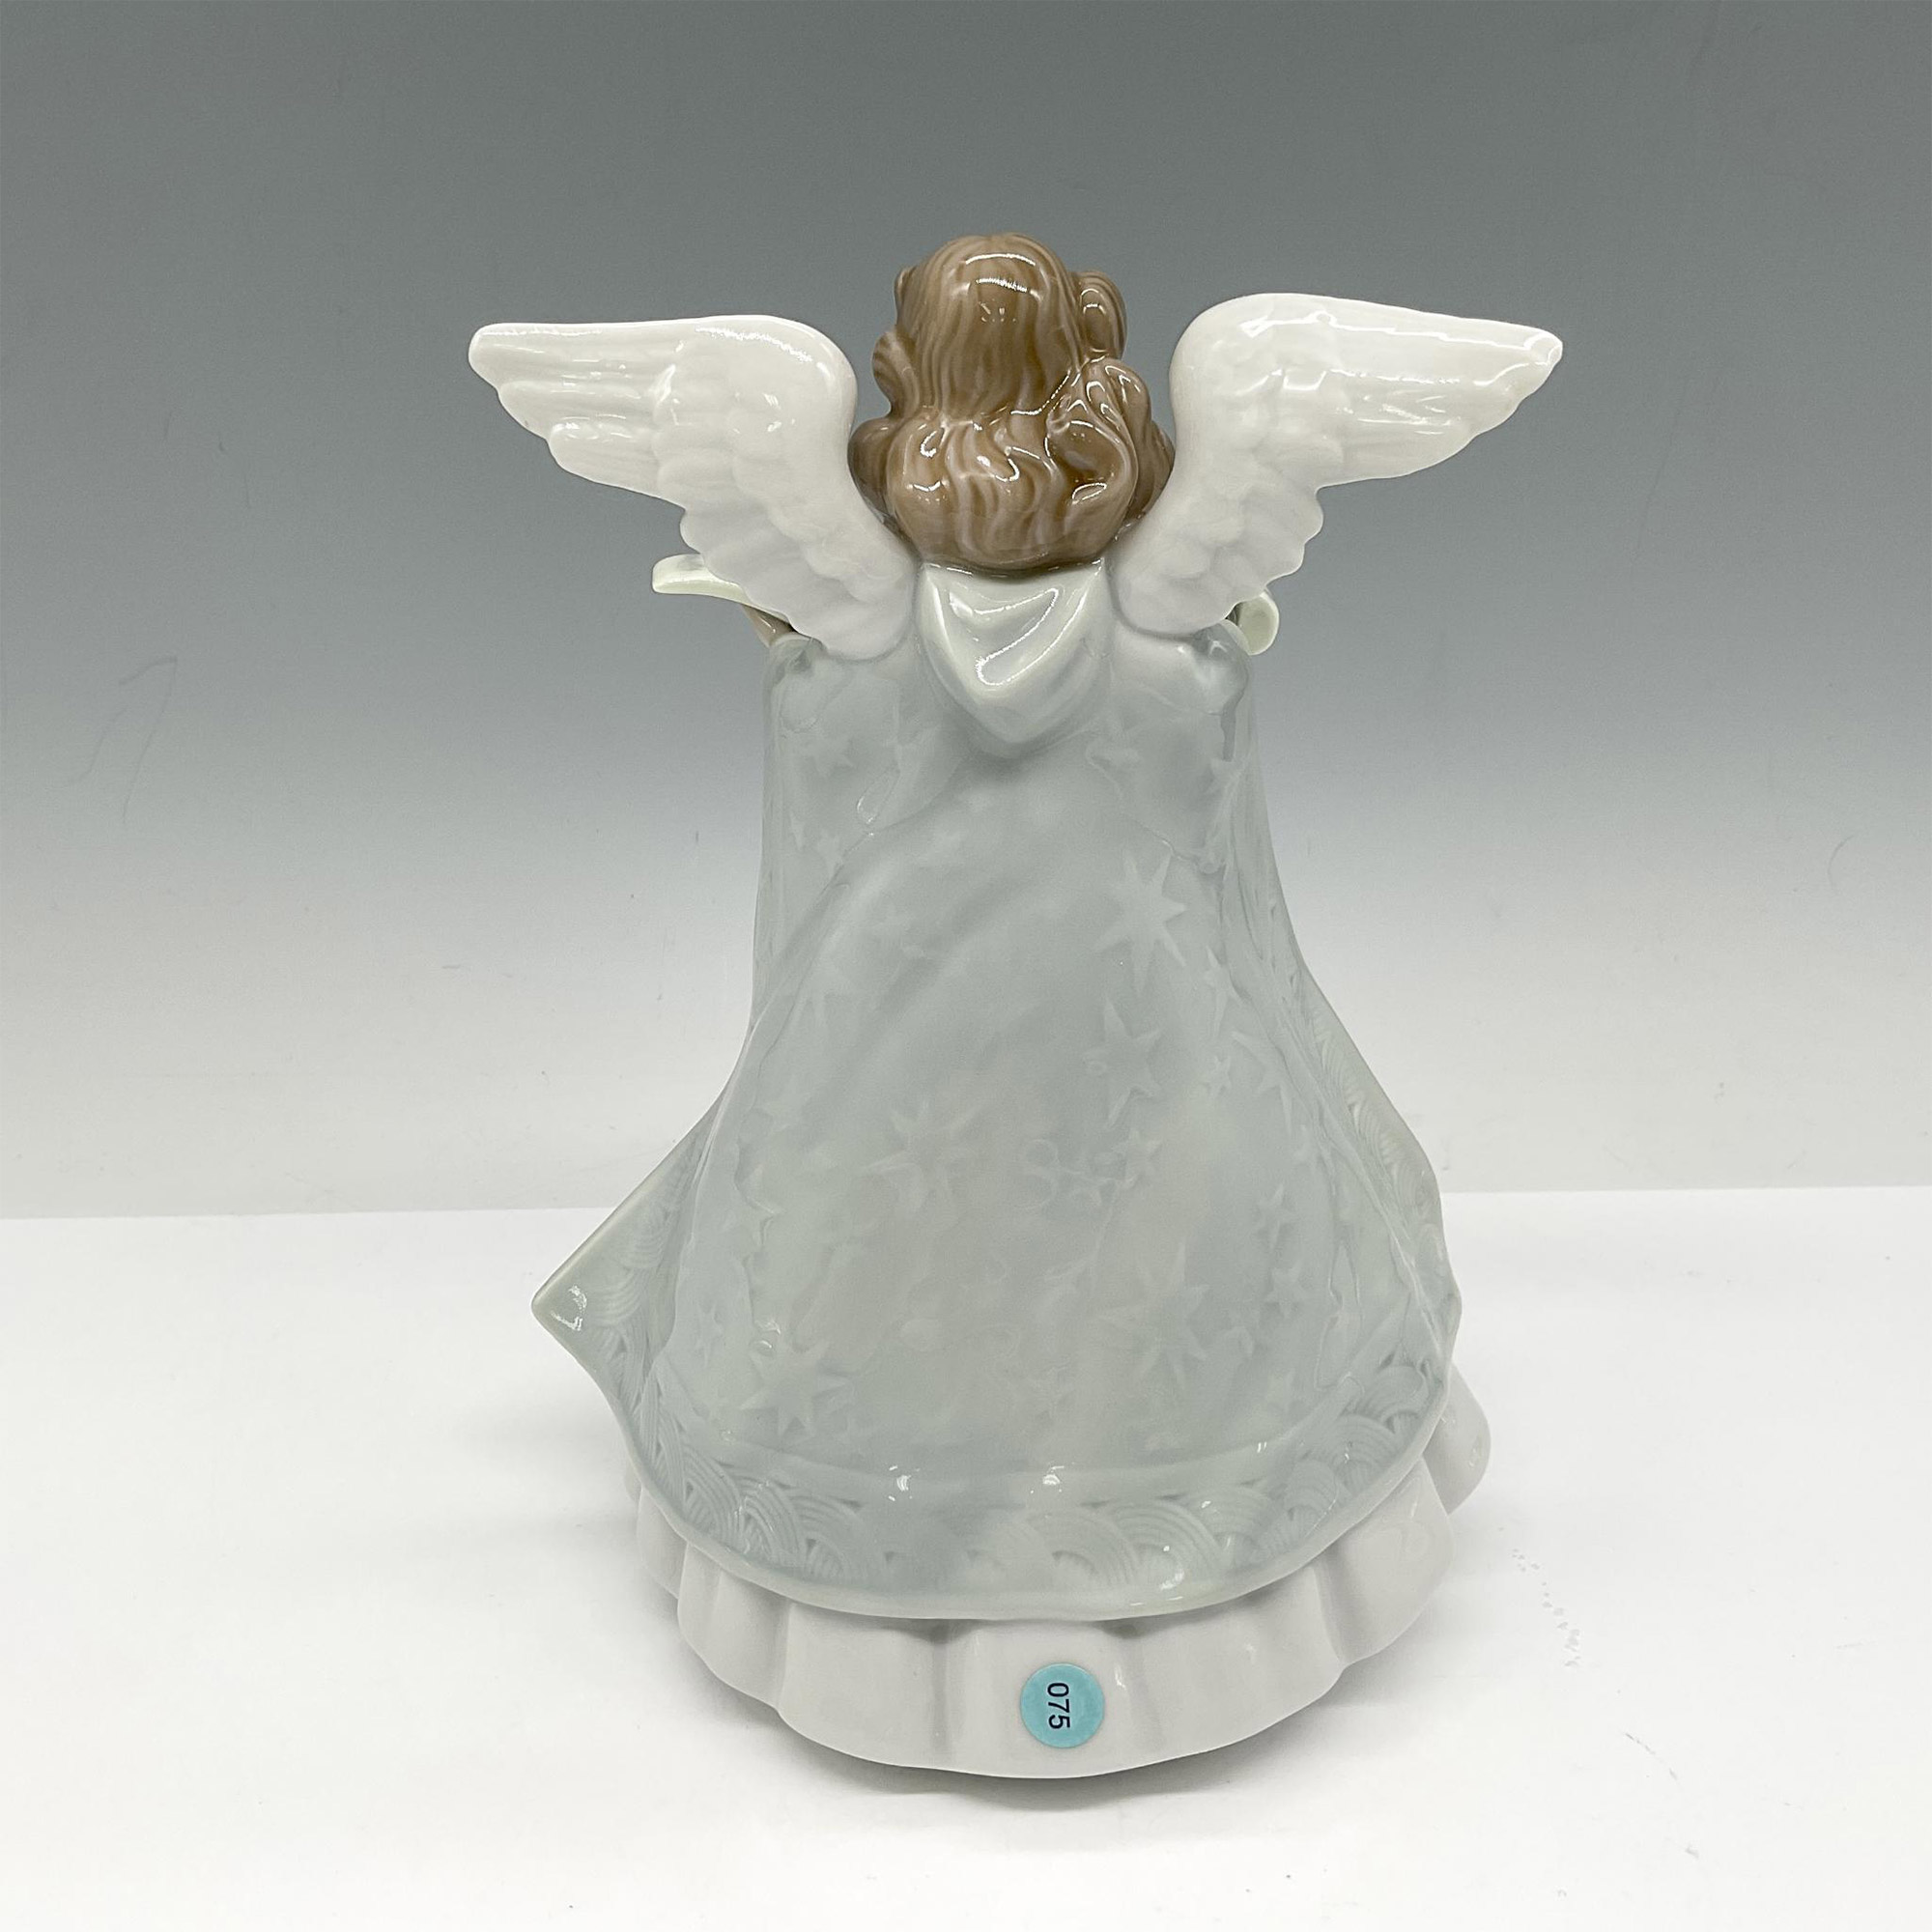 Tree Topper 1005875 - Lladro Porcelain Holiday Decoration - Image 2 of 4